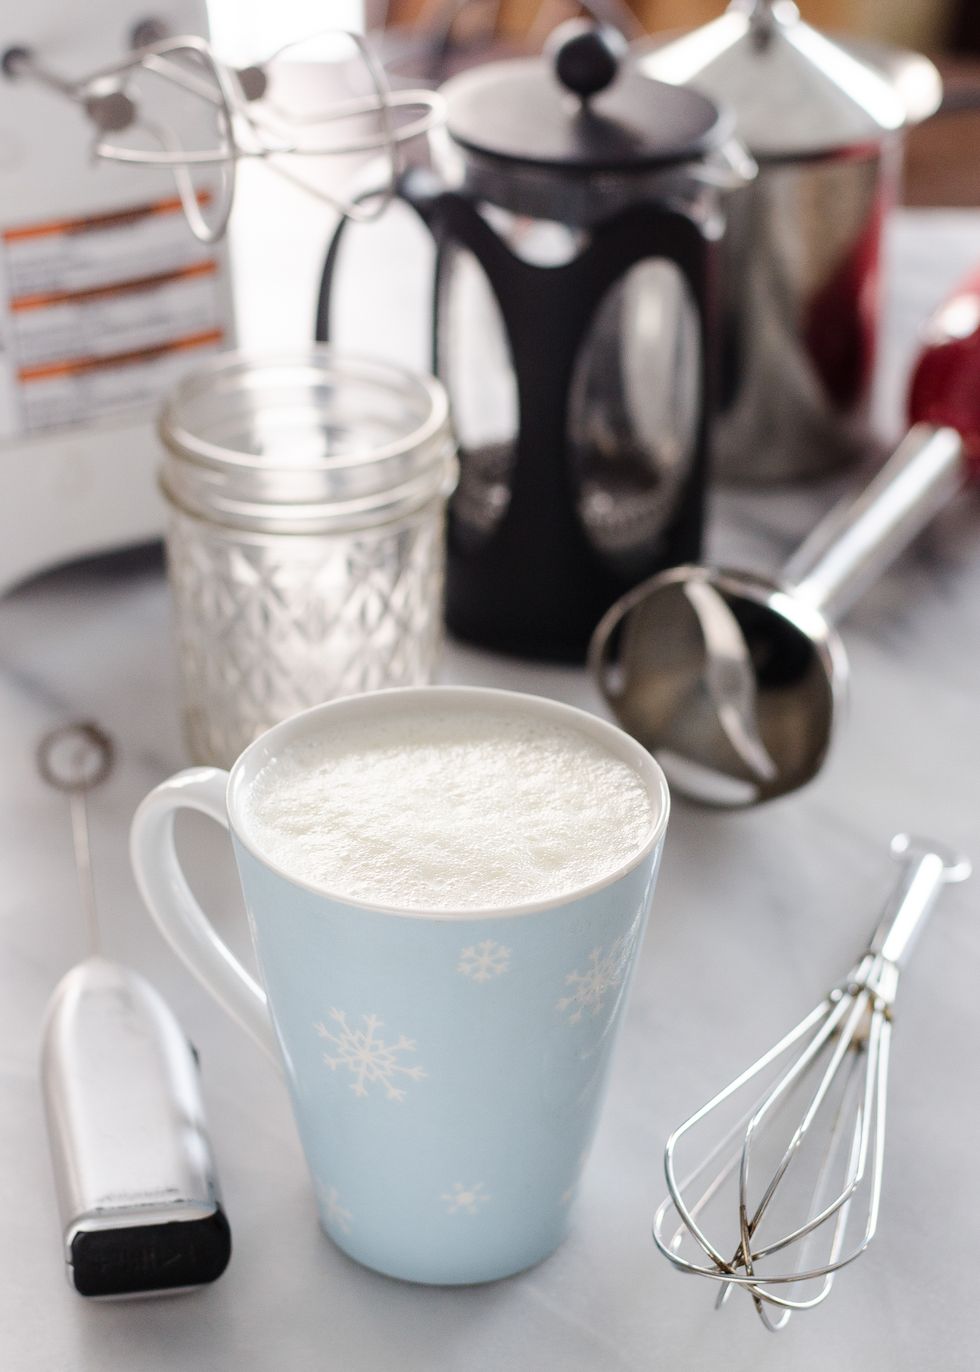 How to Froth Milk Without an Espresso Machine